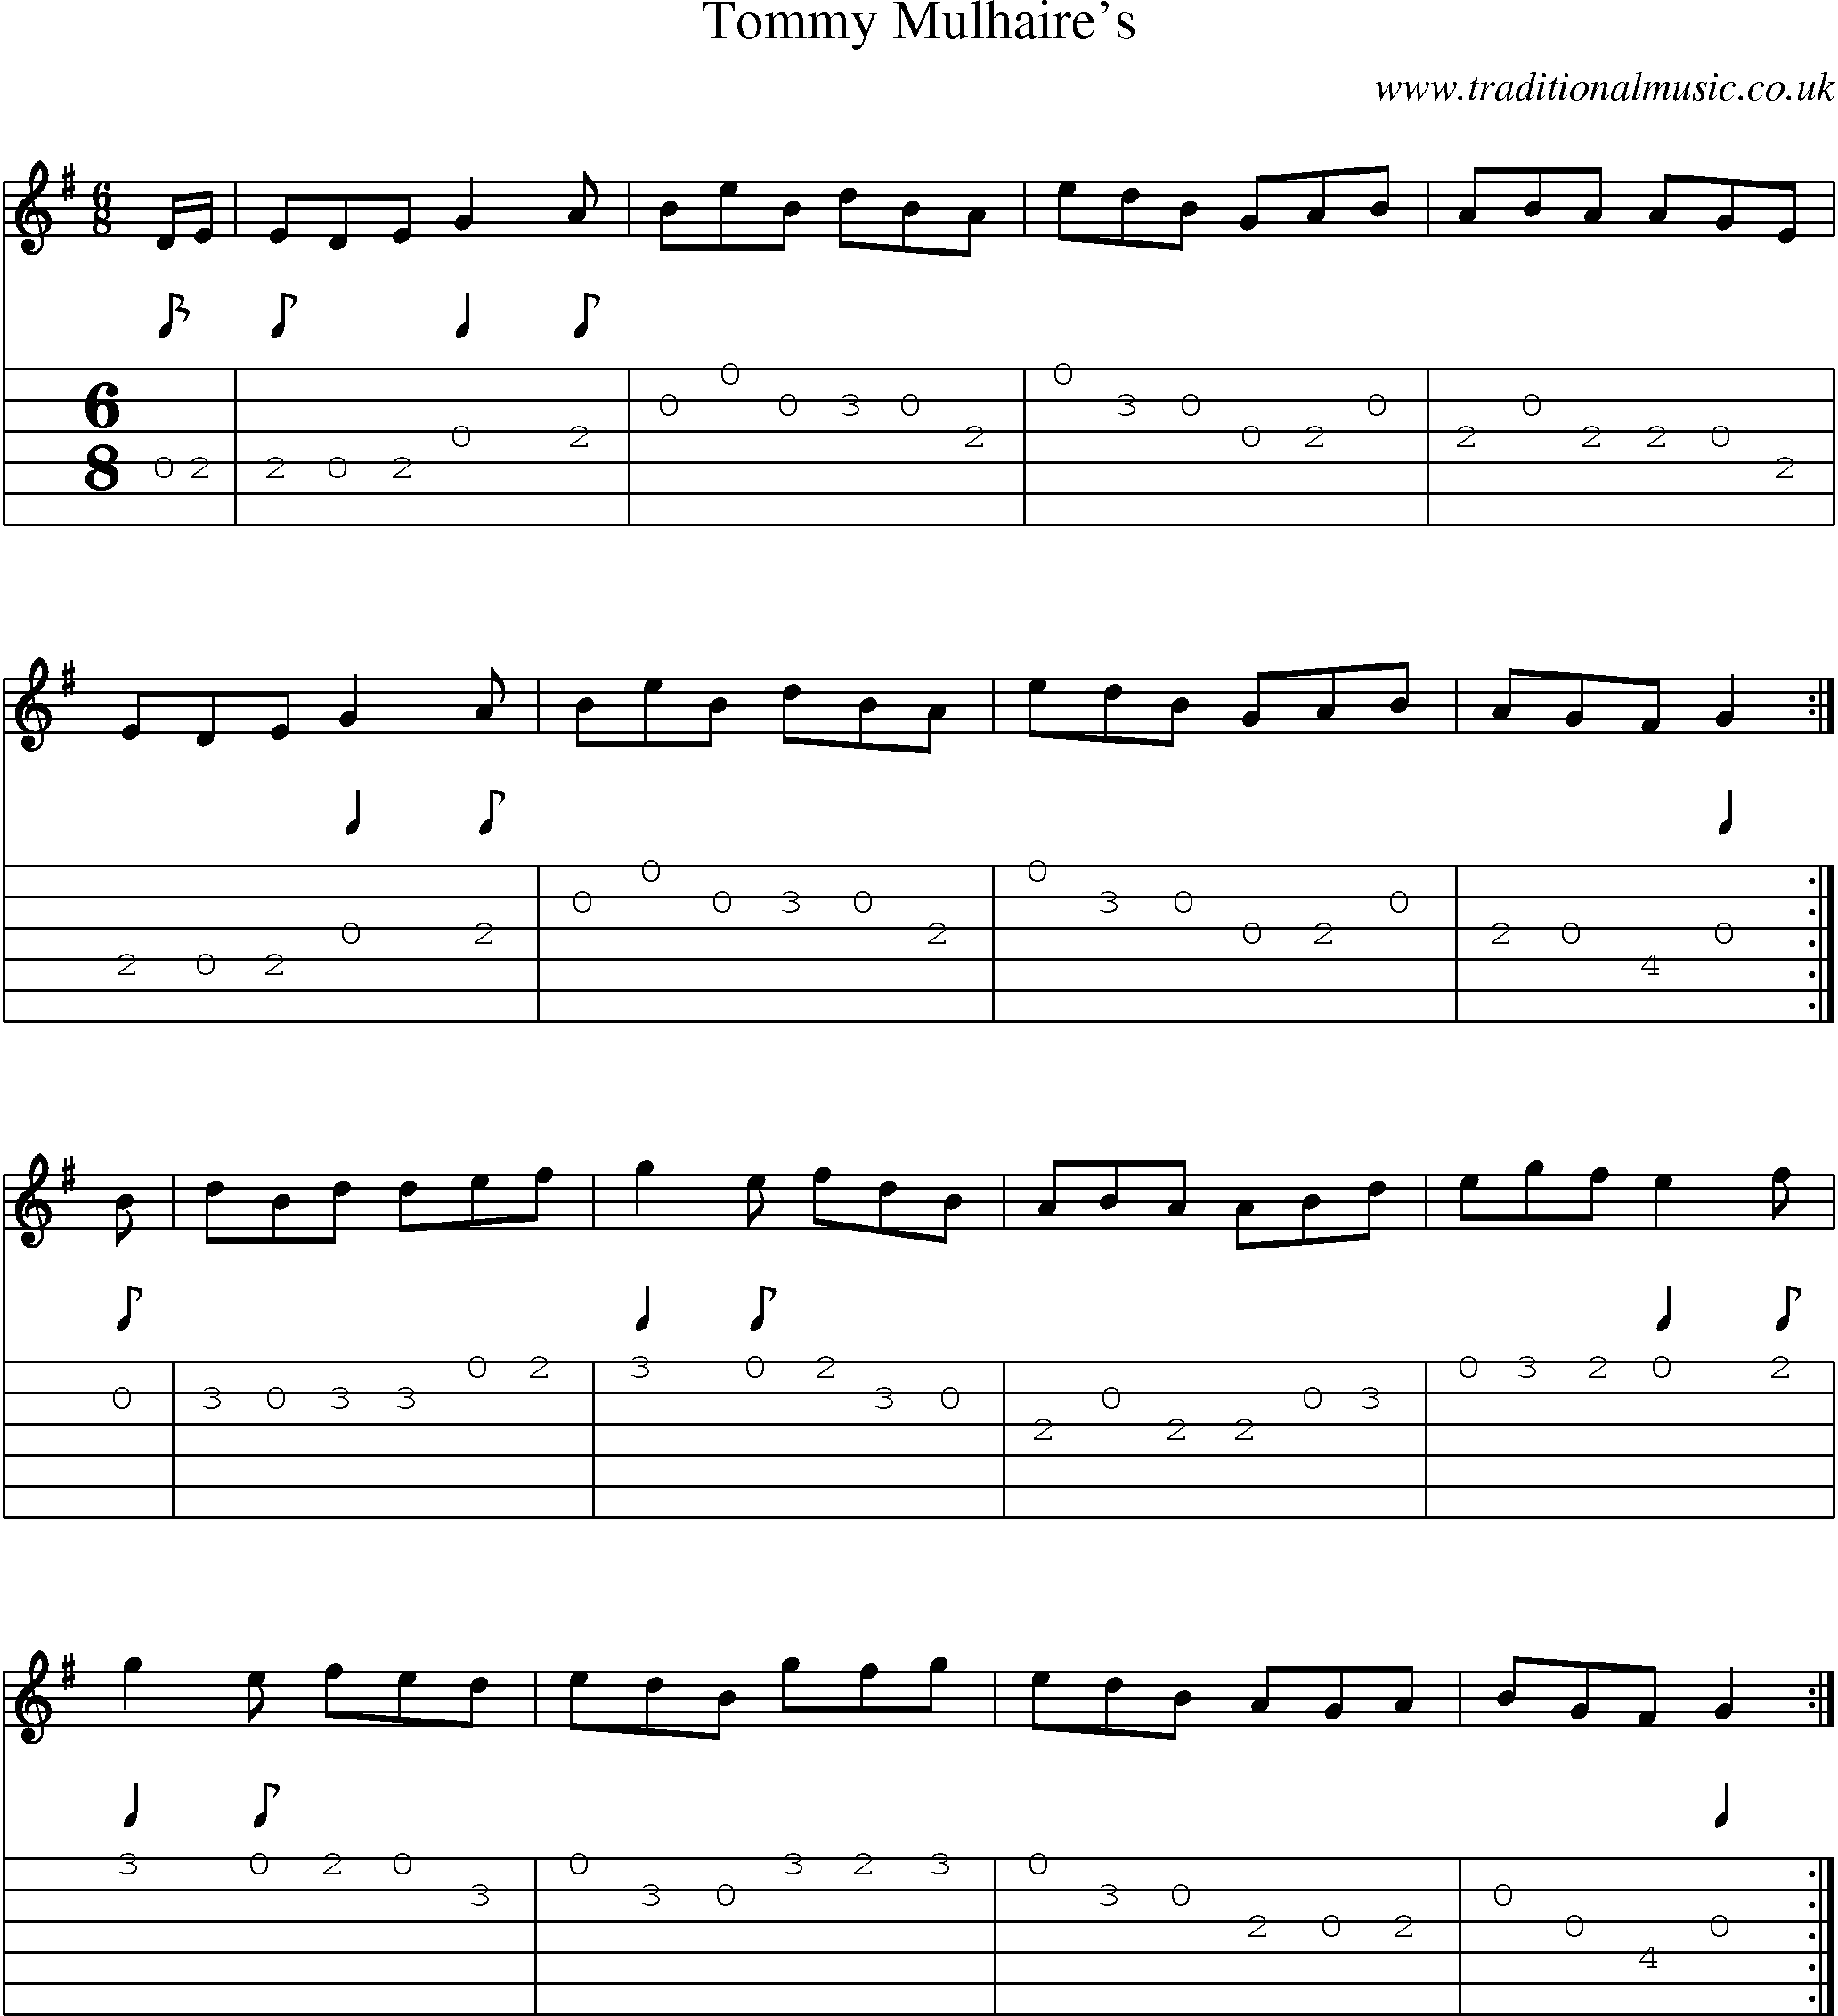 Music Score and Guitar Tabs for Tommy Mulhaires